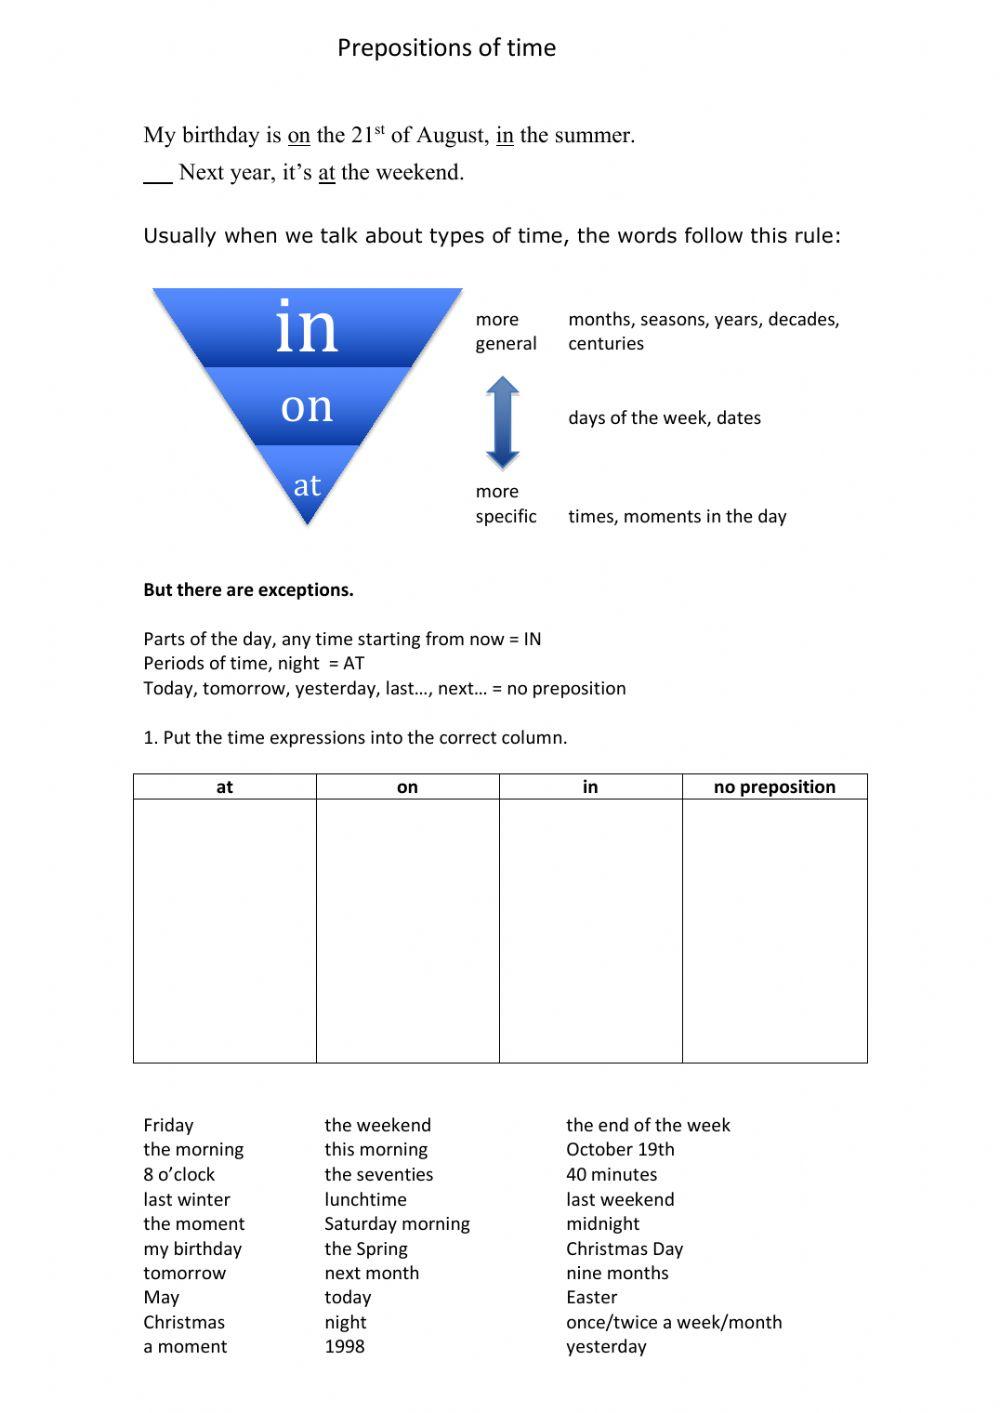 Prepositions of Time Matching